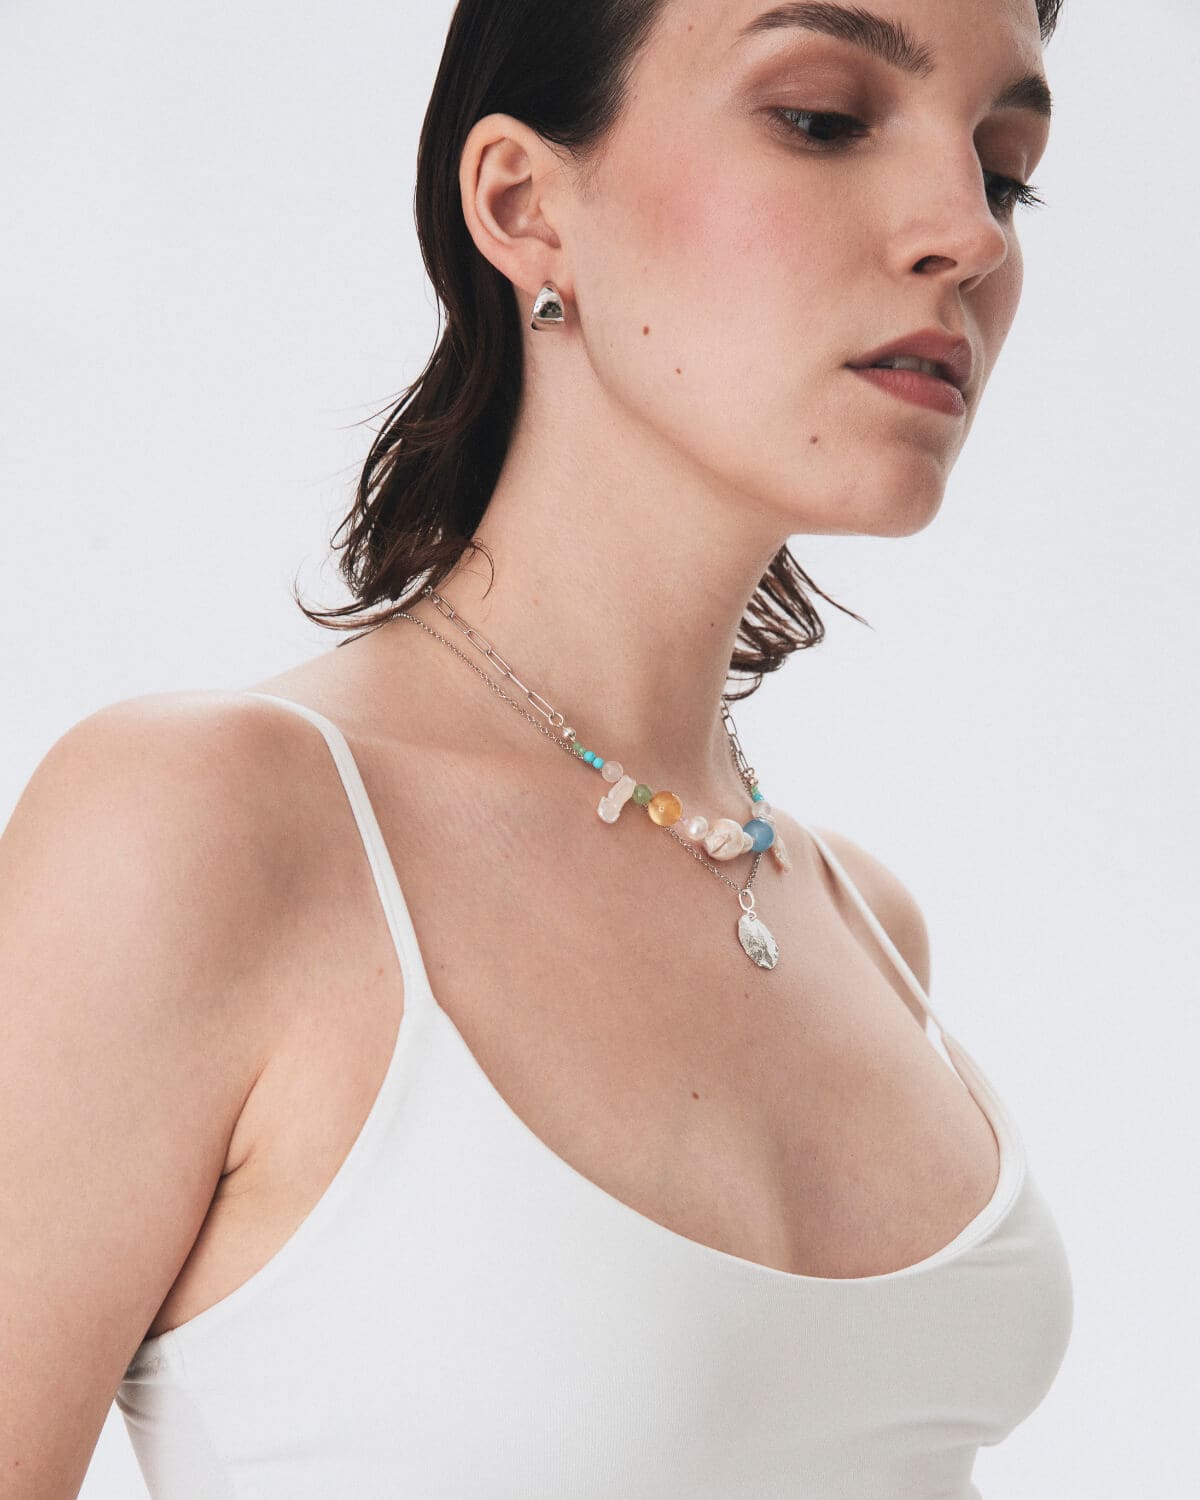 Fashionable necklaces with pearls and colored stones on model